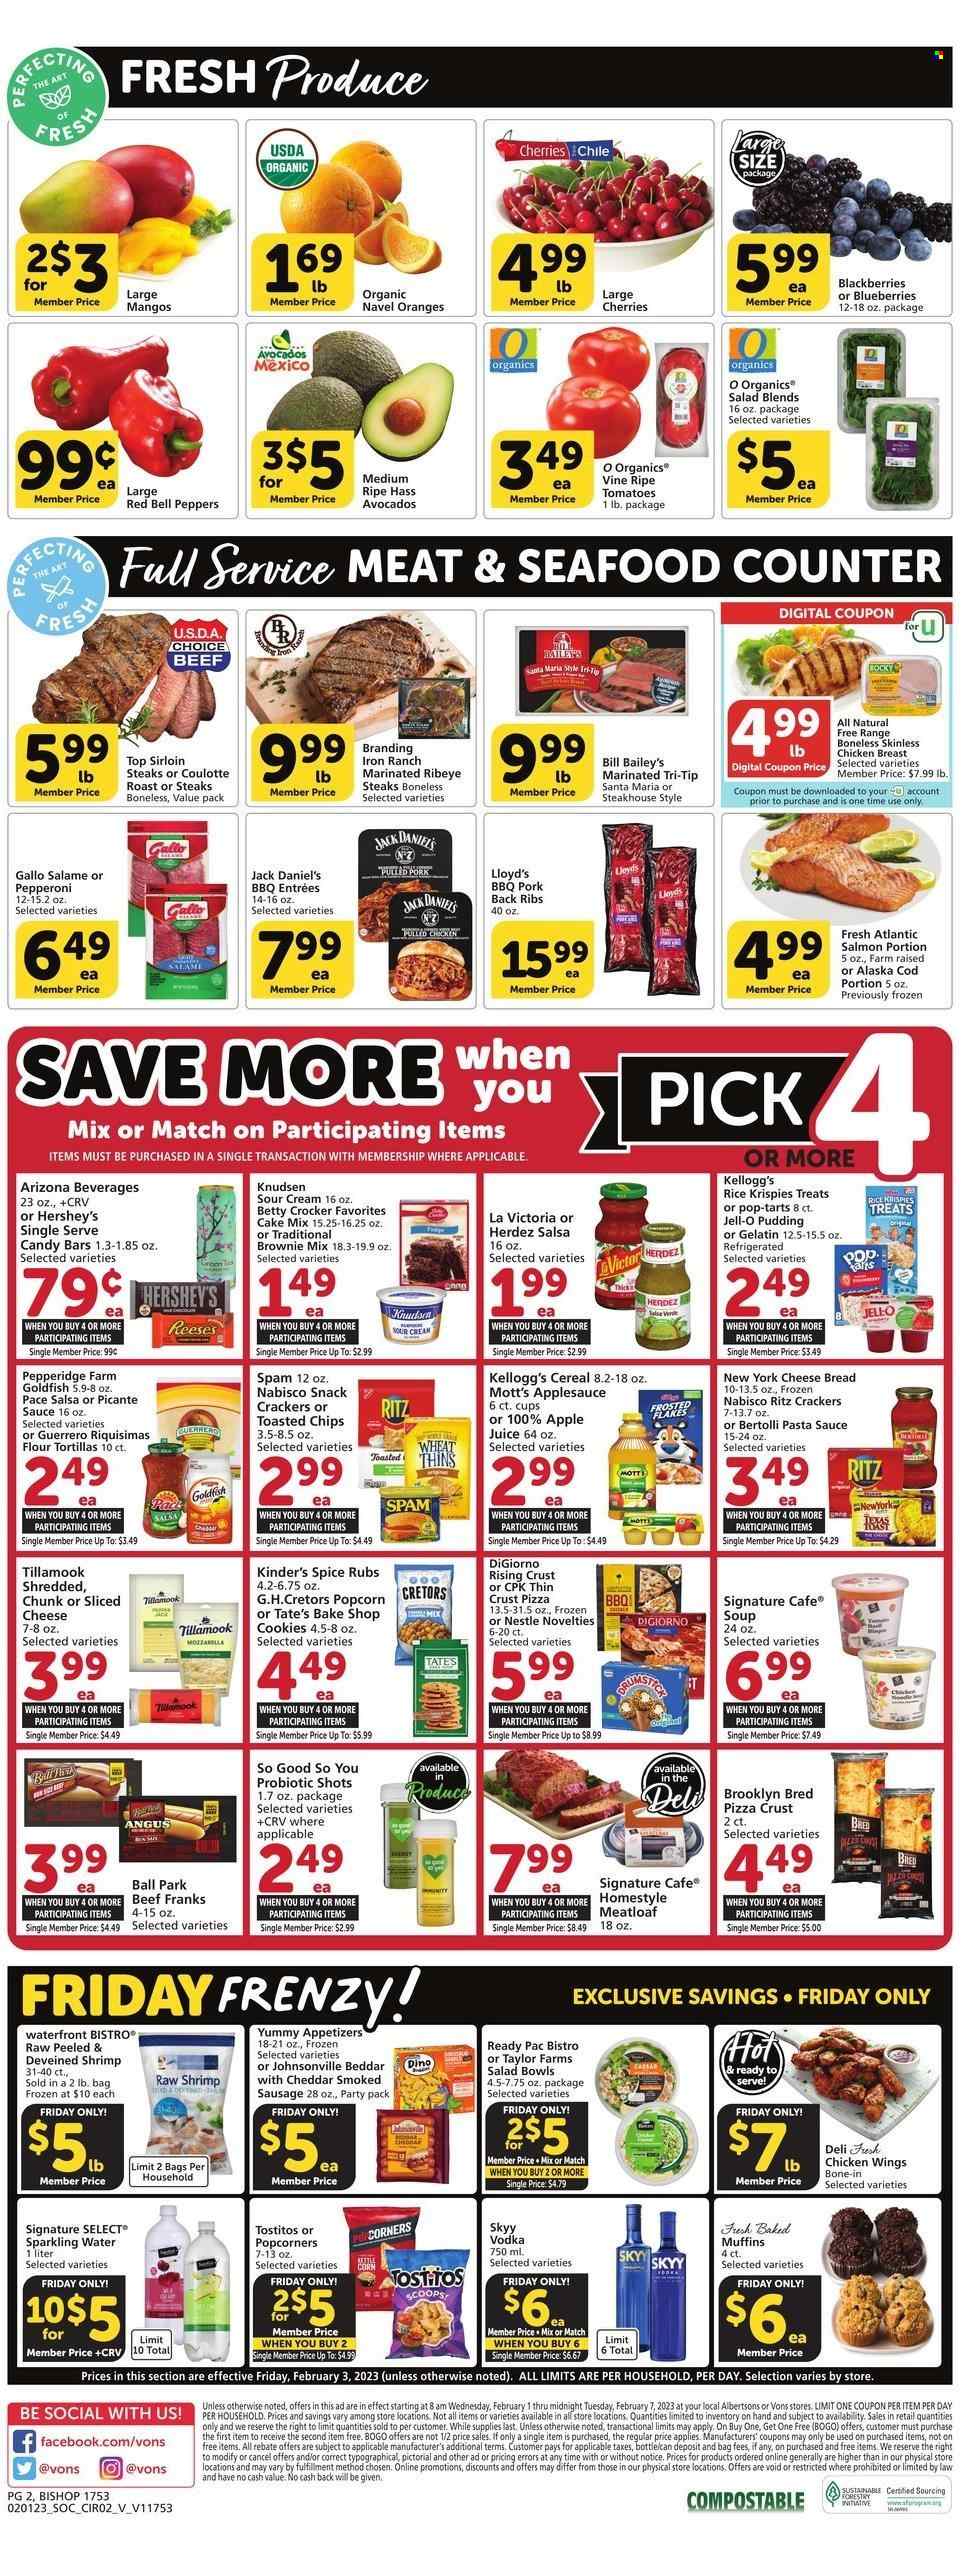 thumbnail - Vons Flyer - 02/01/2023 - 02/07/2023 - Sales products - bread, tortillas, flour tortillas, muffin, brownie mix, cake mix, bell peppers, peppers, avocado, blackberries, blueberries, oranges, Mott's, chicken breasts, chicken wings, beef meat, steak, sirloin steak, ribeye steak, ribs, meatloaf, Johnsonville, pork meat, pork ribs, pork back ribs, cod, salmon, seafood, shrimps, Jack Daniel's, pizza, pasta sauce, soup, sauce, Ready Pac, pulled pork, Bertolli, sausage, smoked sausage, pepperoni, Spam, pudding, sour cream, Reese's, Hershey's, cookies, Nestlé, snack, crackers, Kellogg's, Pop-Tarts, RITZ, Thins, popcorn, Goldfish, Tostitos, Jell-O, cereals, Rice Krispies, Frosted Flakes, spice, salsa, apple sauce, apple juice, juice, AriZona, So Good So You, sparkling water, vodka, SKYY, beer, cup, salad bowl, navel oranges. Page 2.